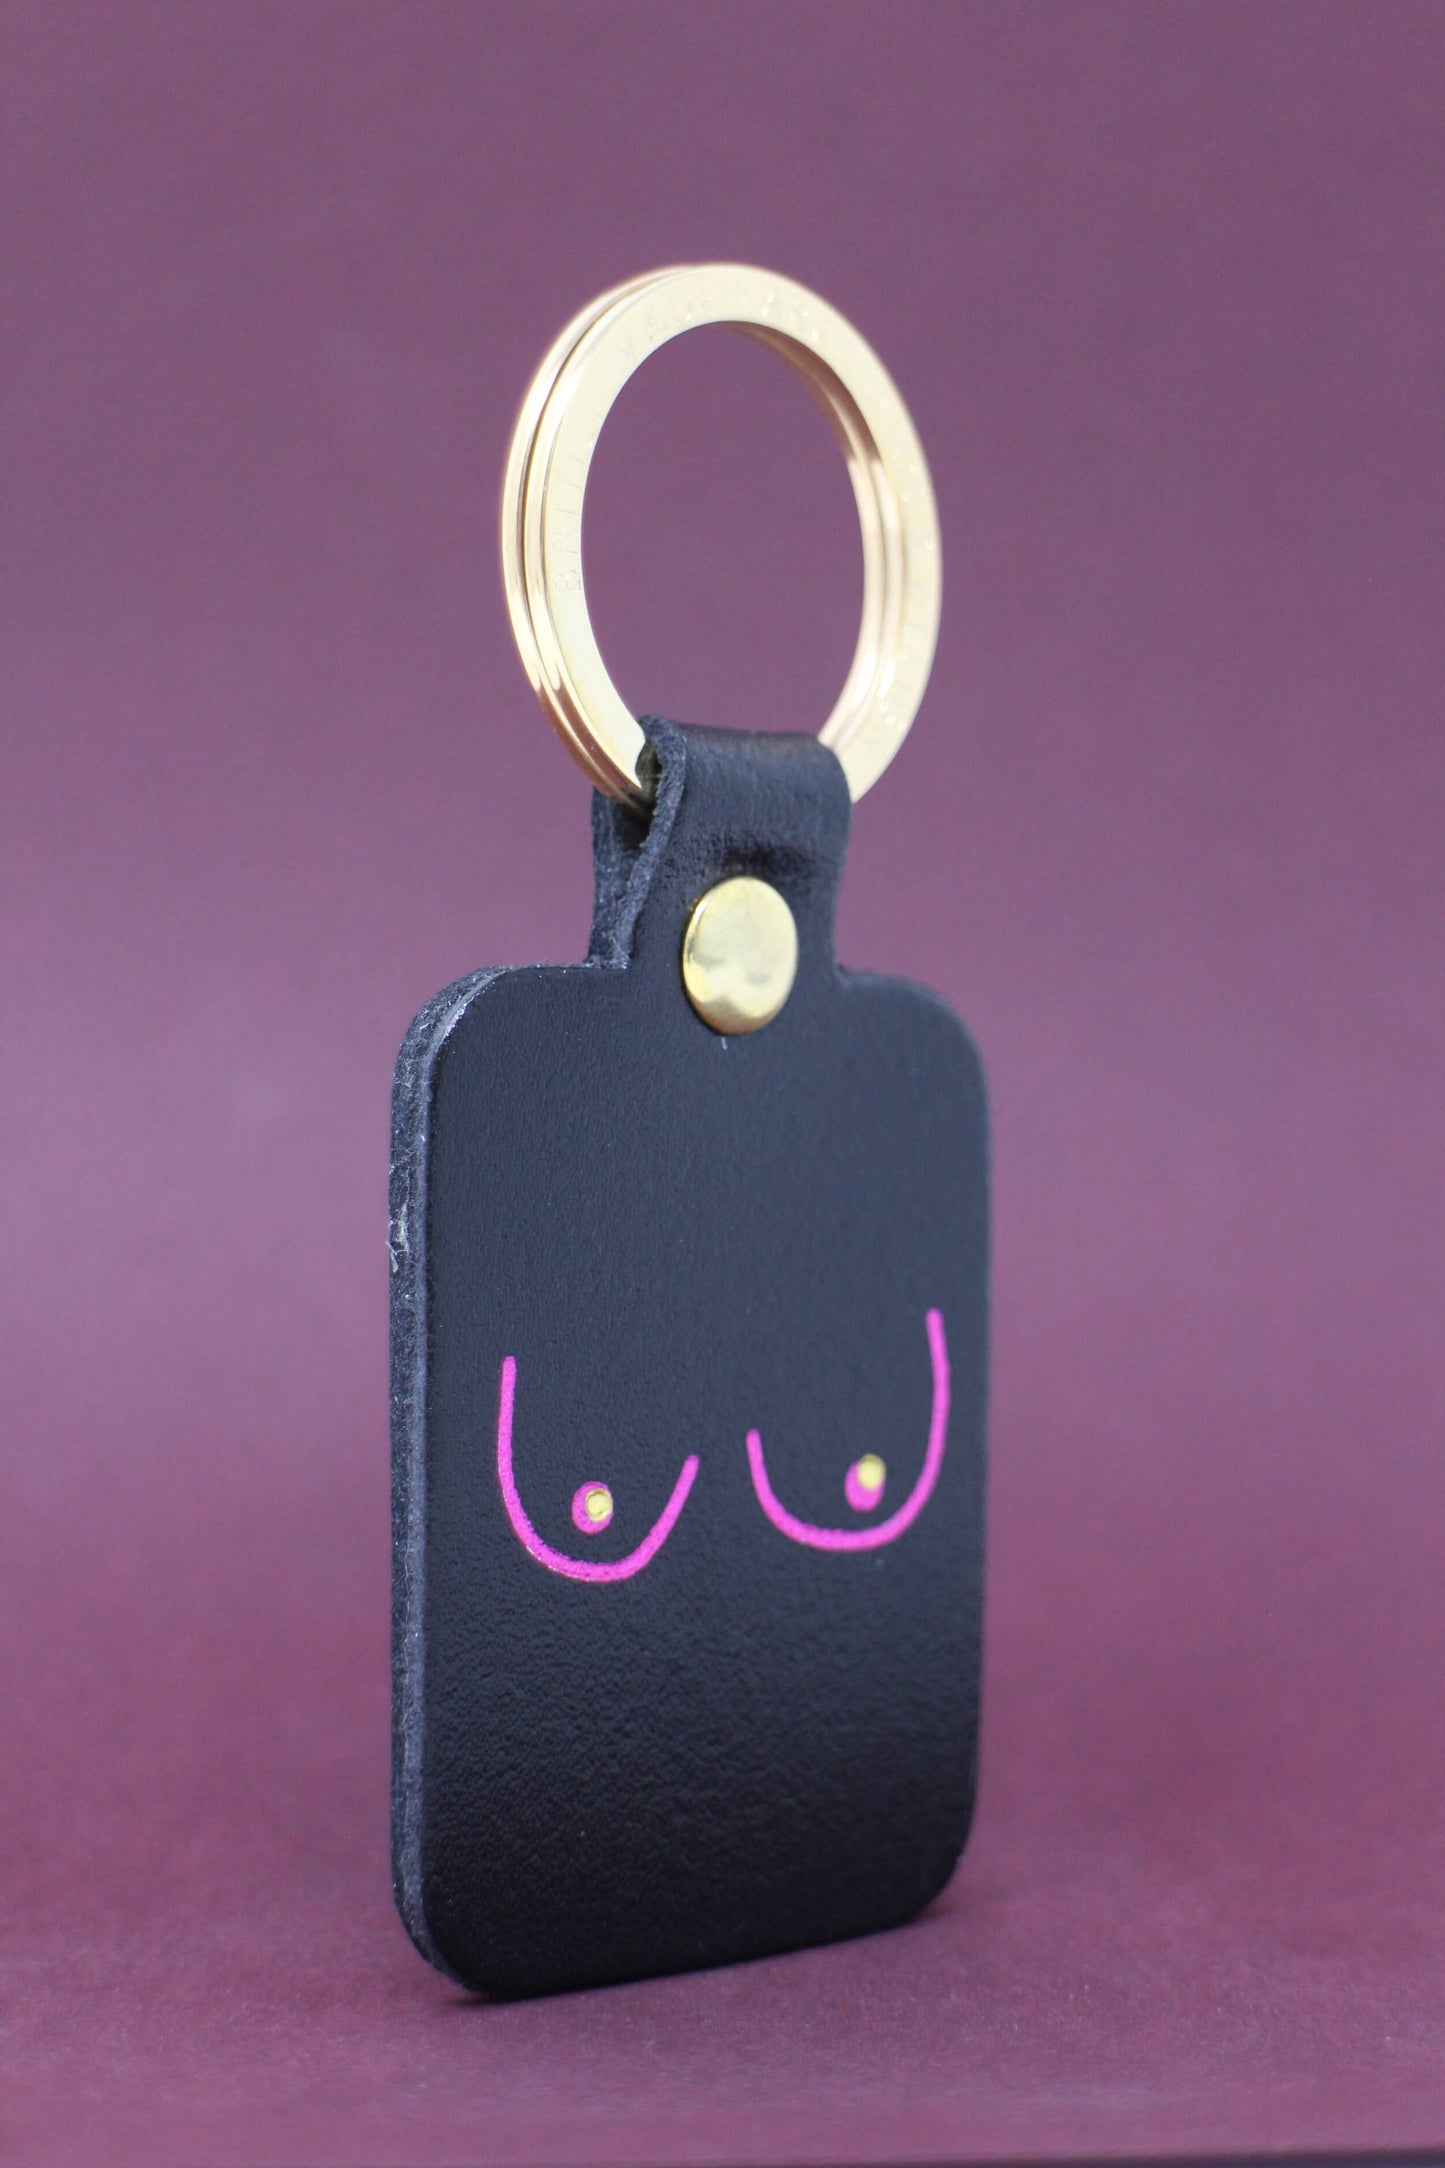 Boob Leather Key Fob: Red